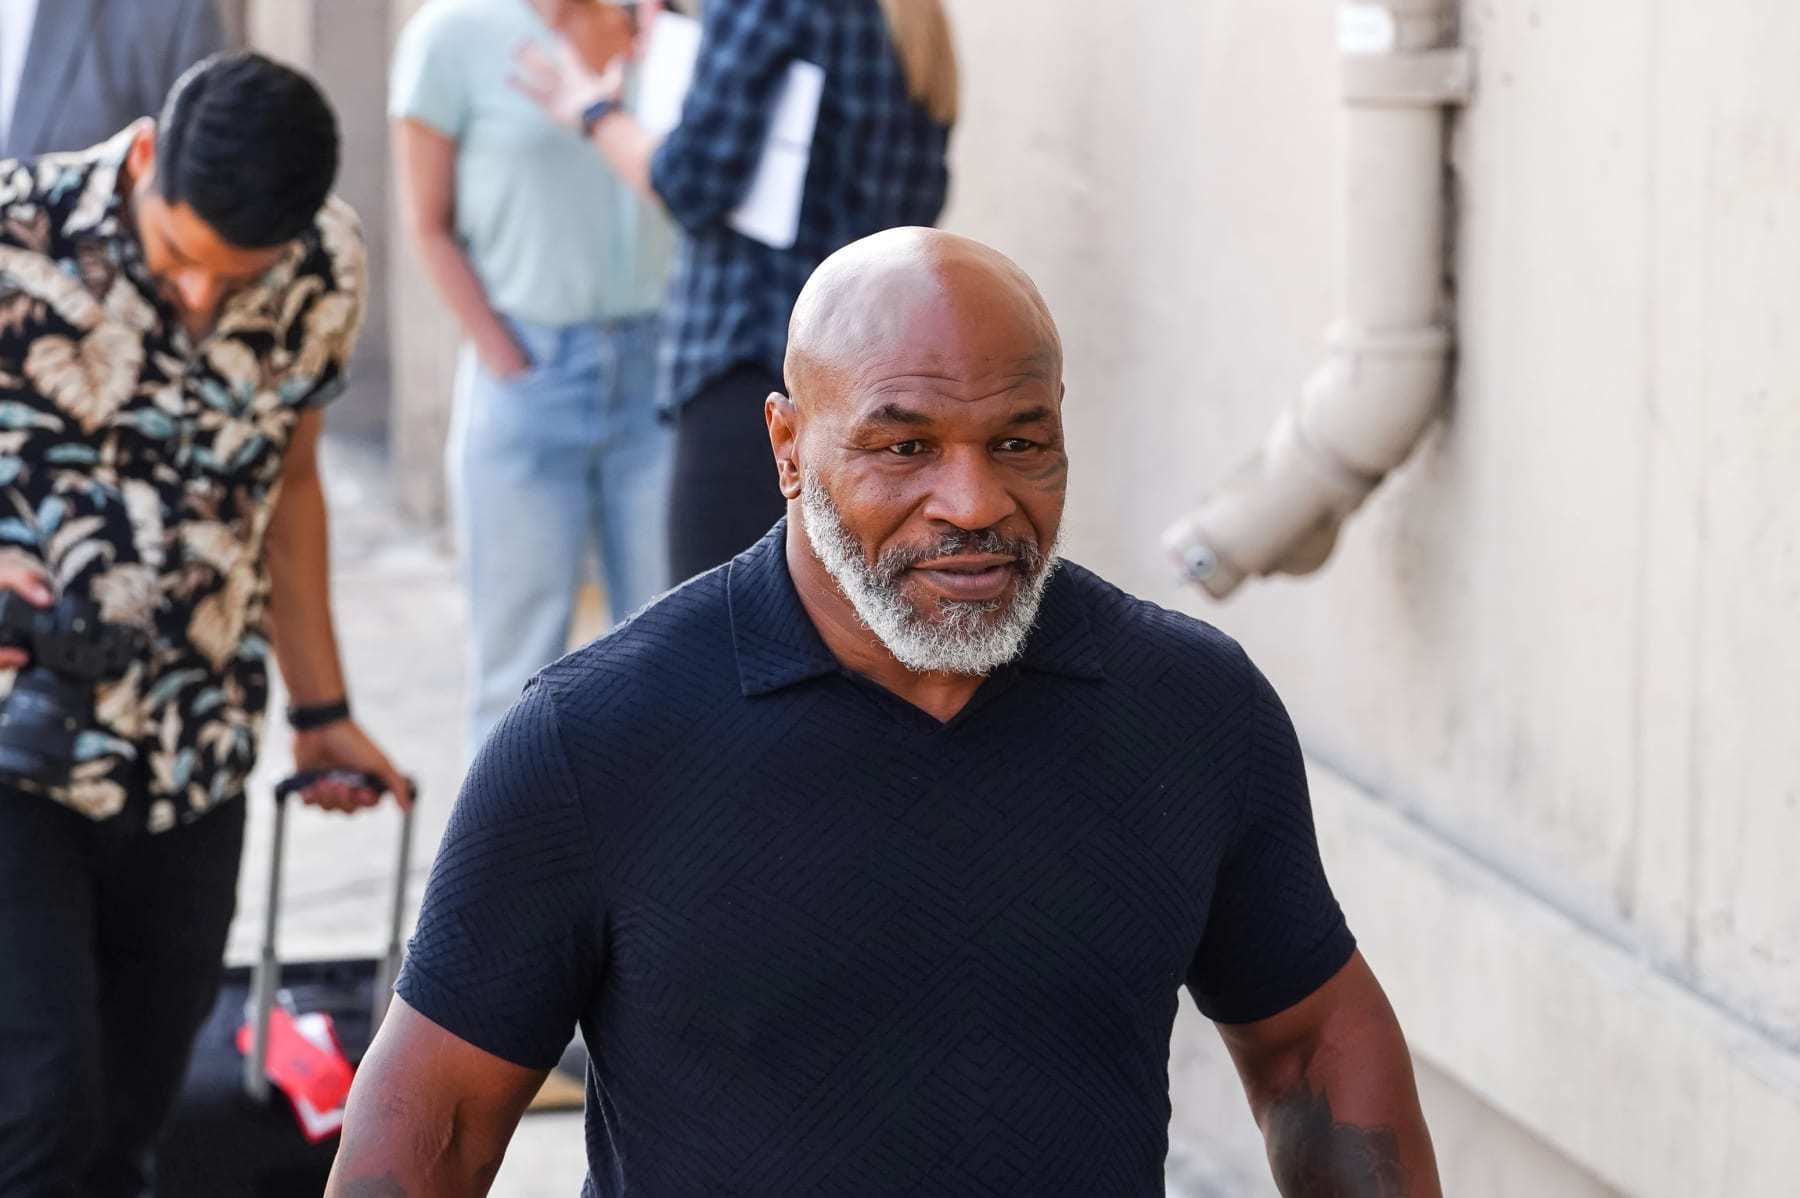 Mike Tyson Says Hulu 'Stole' His Story for Series: 'Heads Will Roll for This'